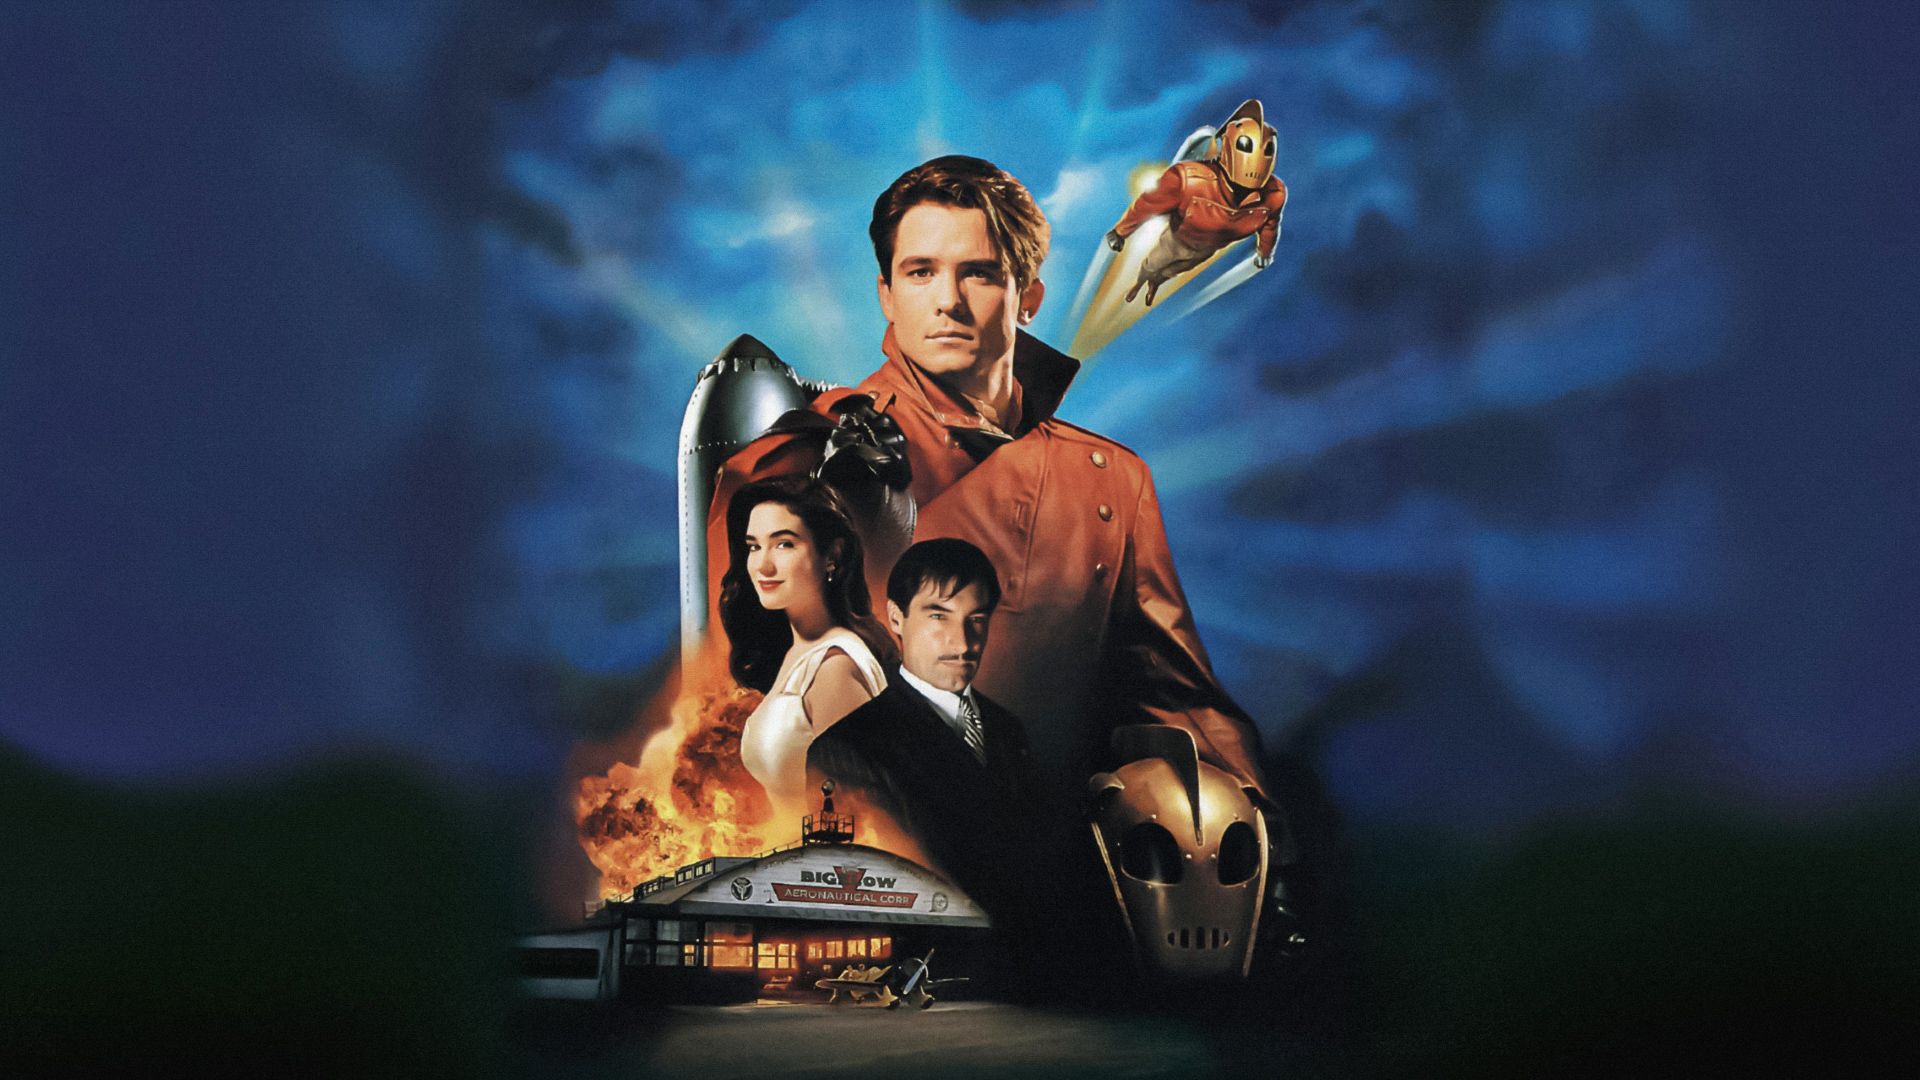 The Rocketeer background